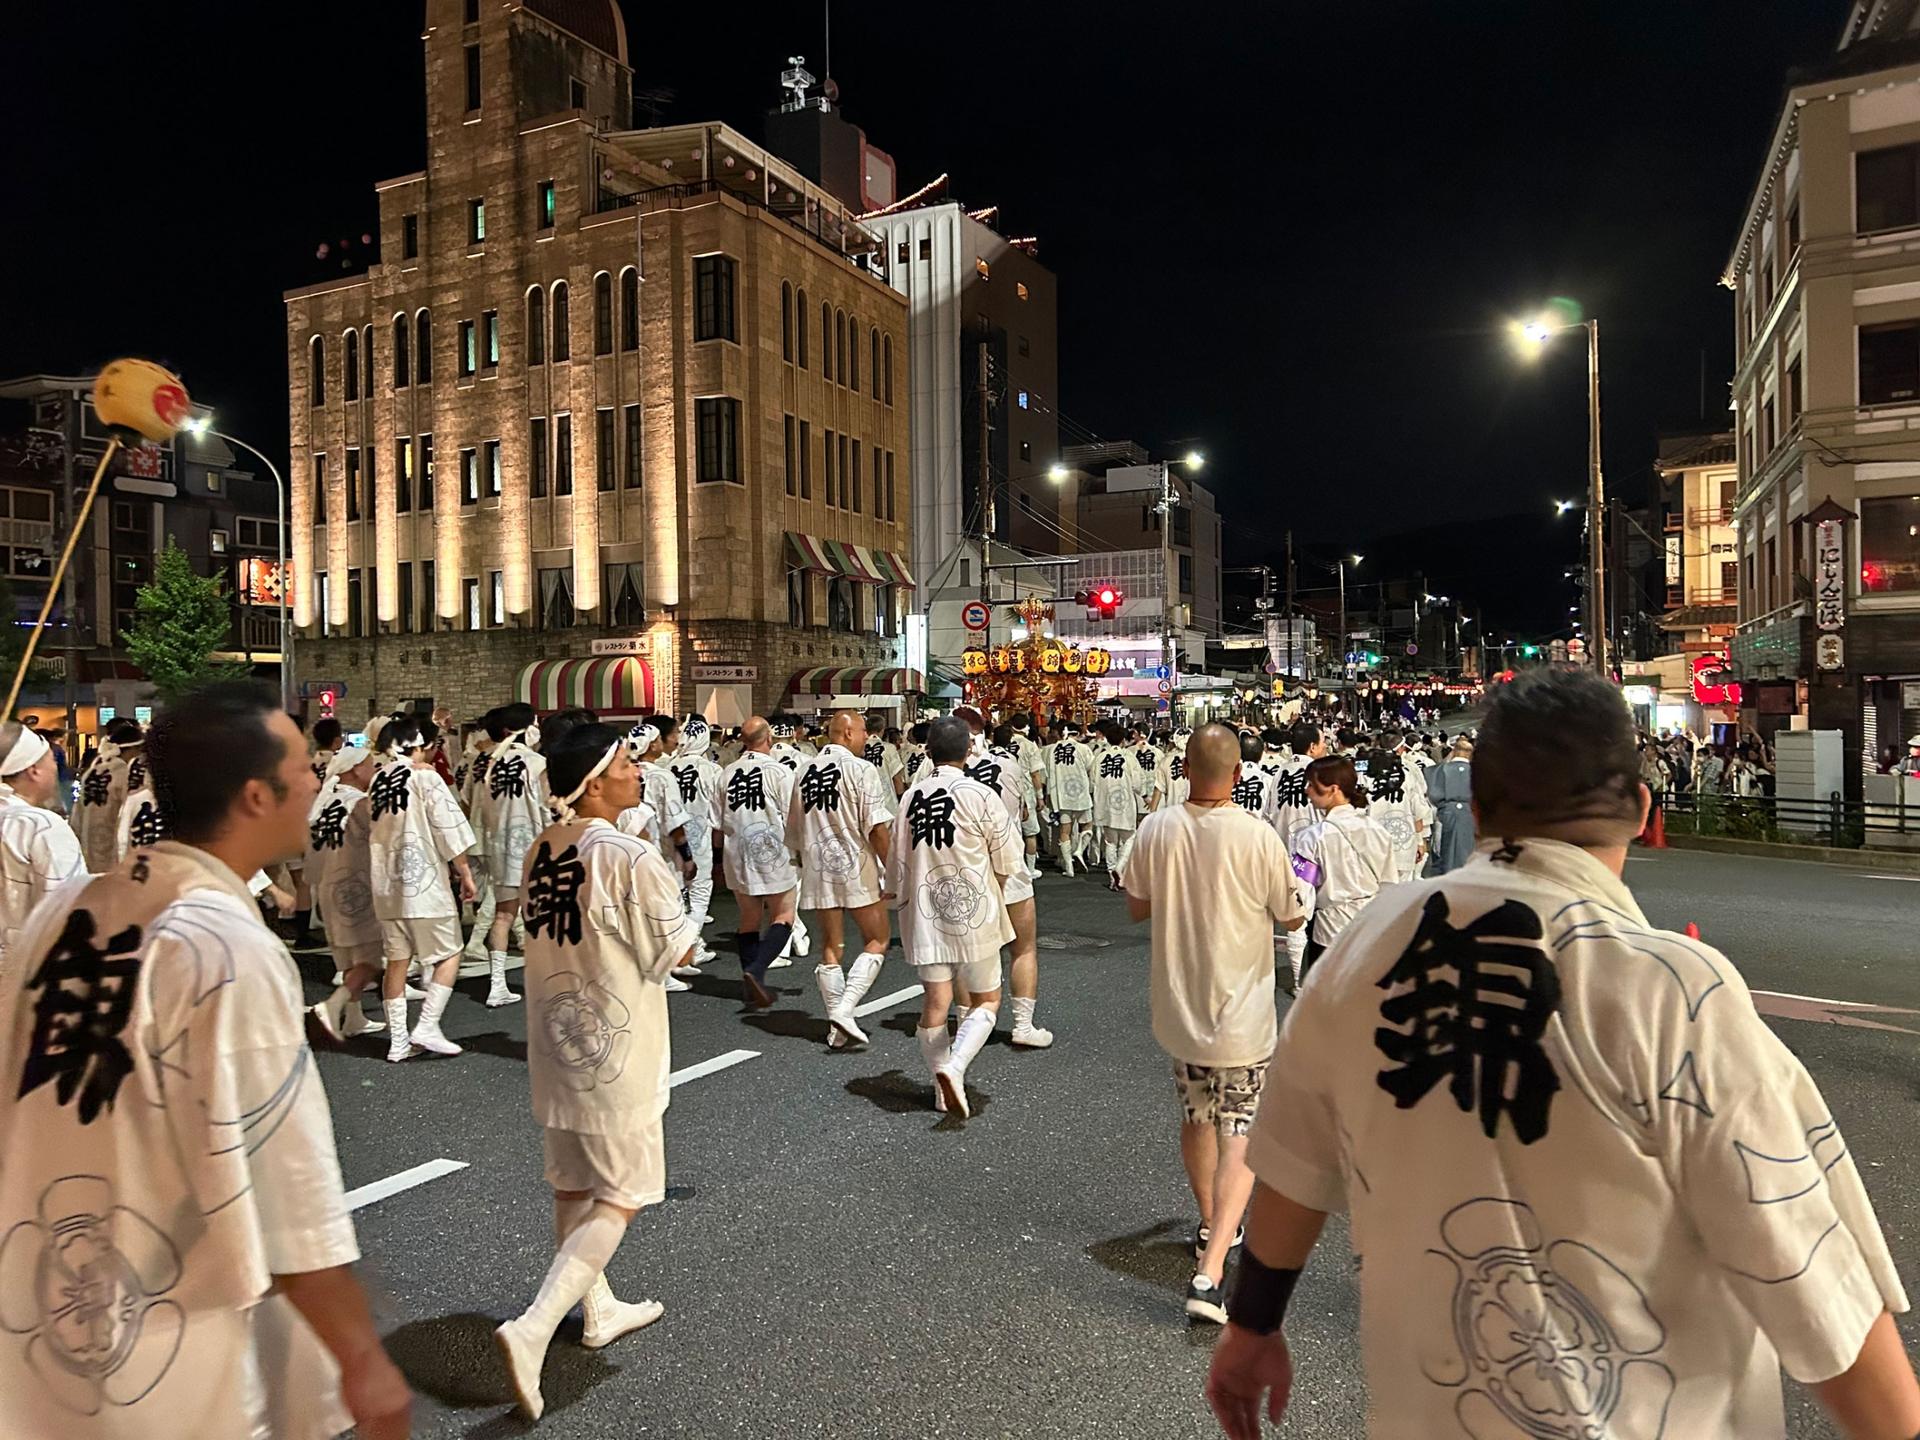 The golden palanquins, Mikoshi, were paraded through the street to honor the deities and were then returned to the main shrine at midnight on July 24. 